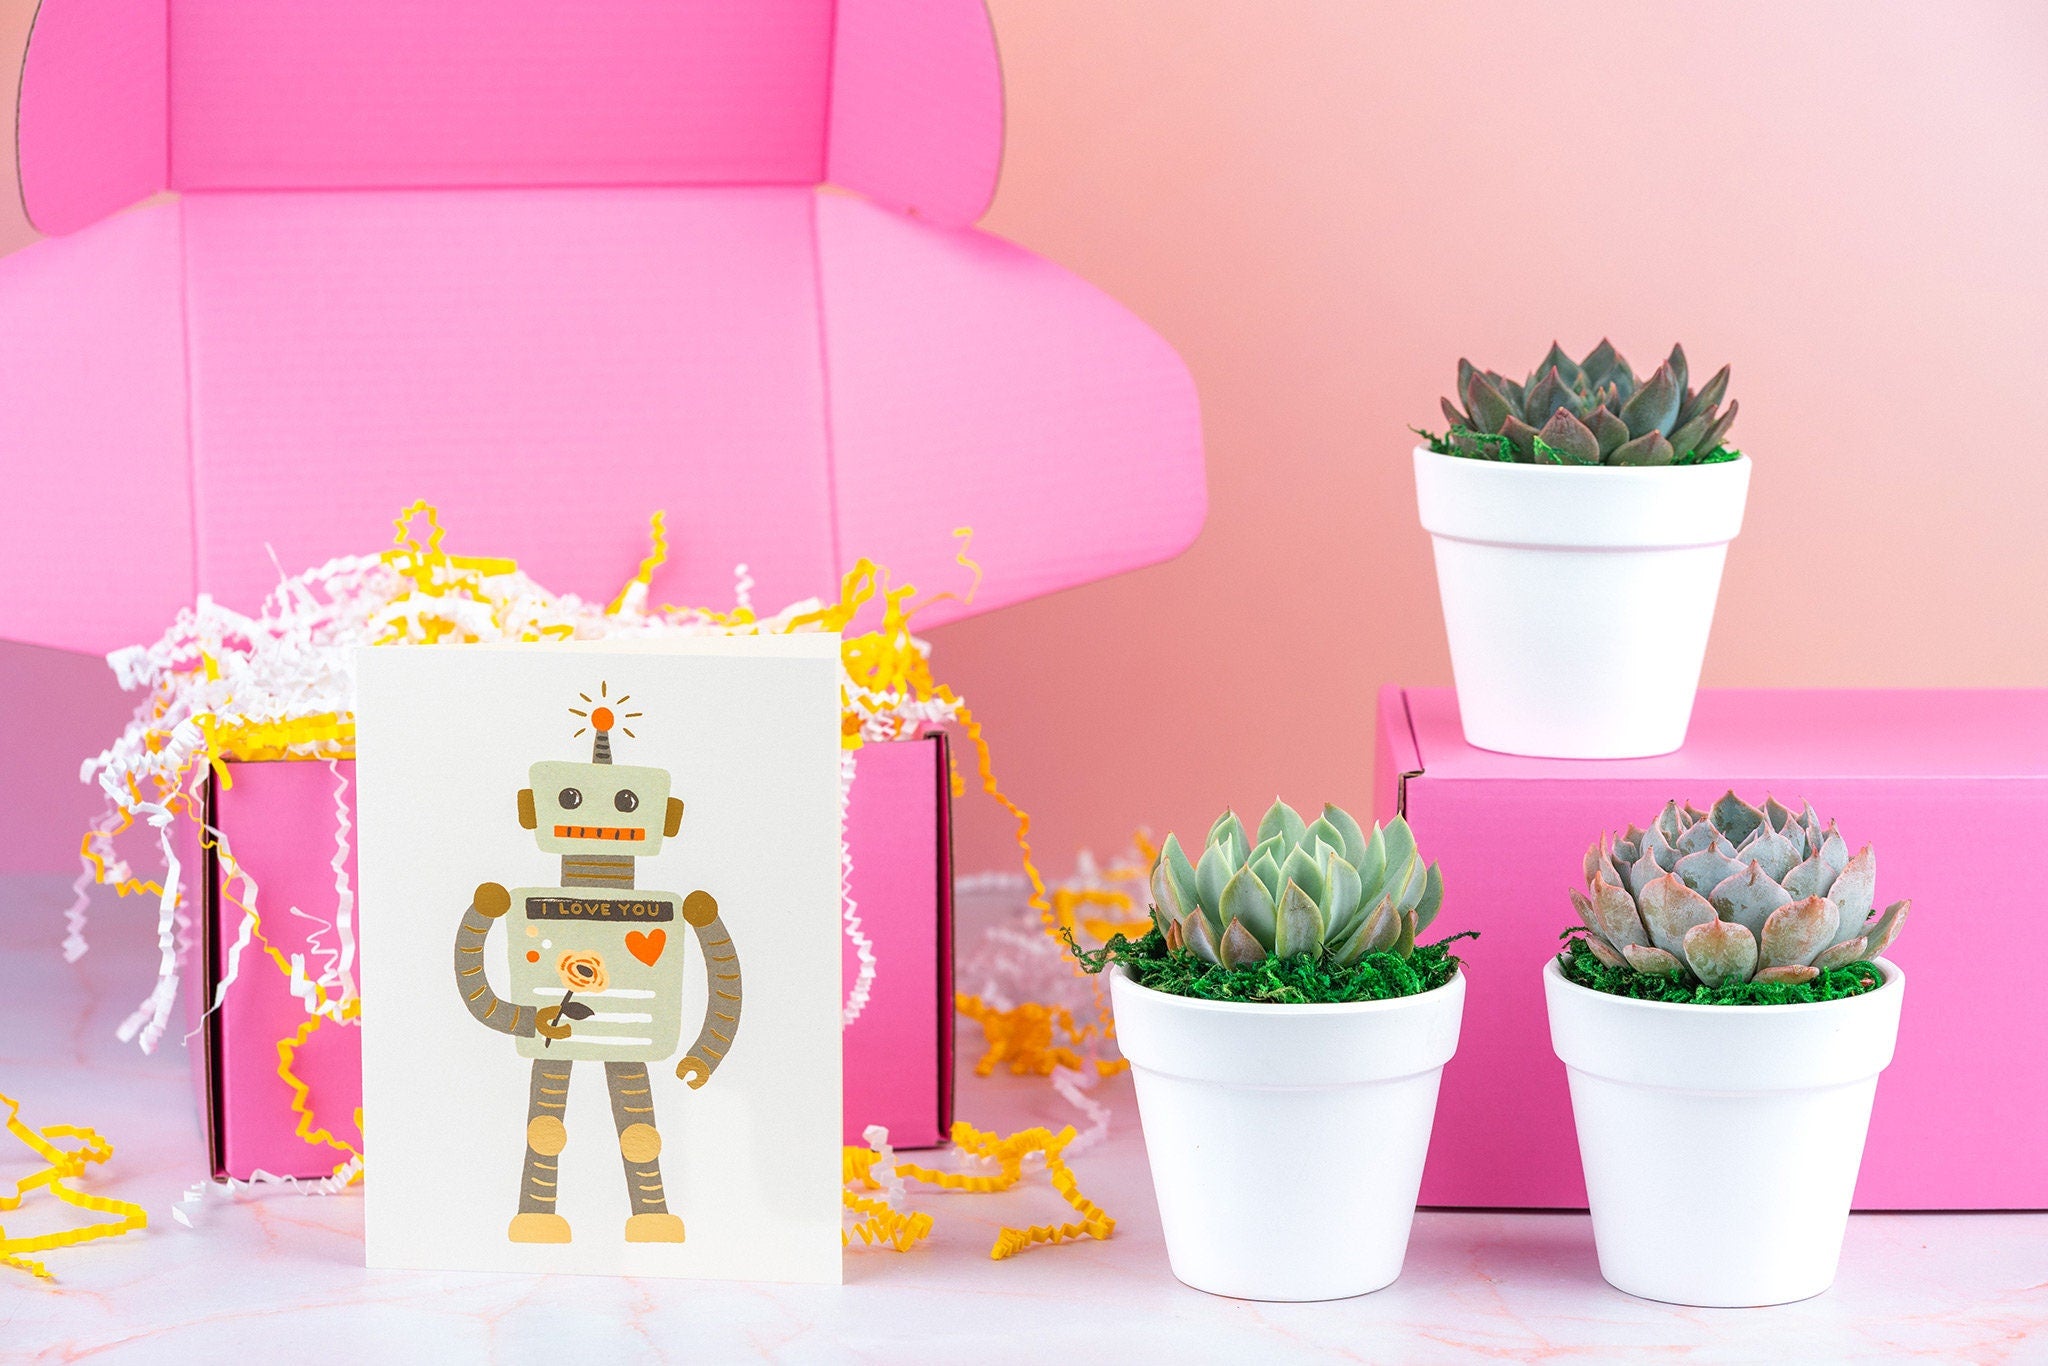 I love you! Robot Succulent Gift Box | 3 Living Succulent Pots + Personalized Greeting Card, Valentines Day Gift, Romantic Gift